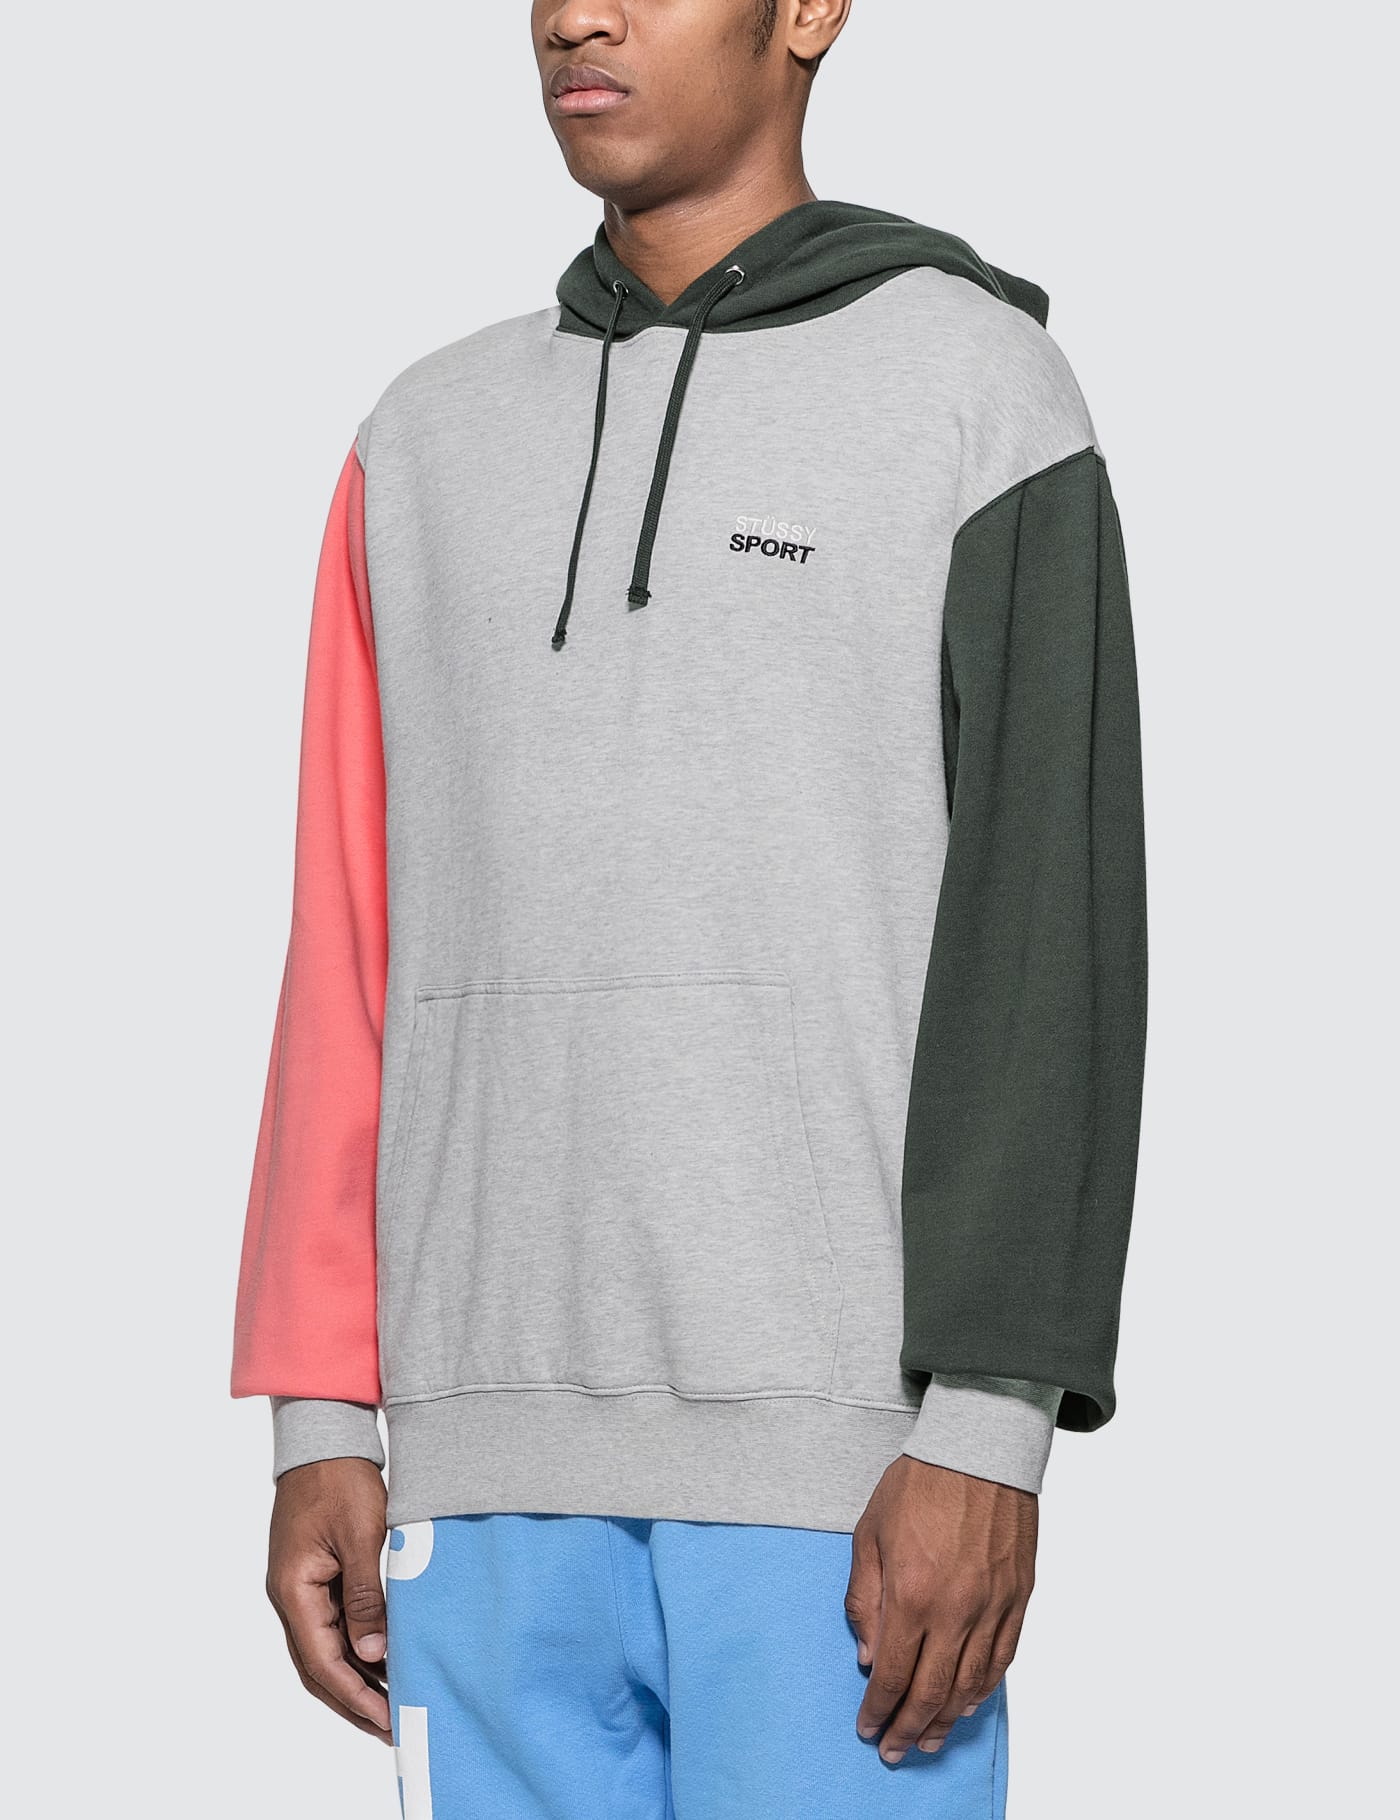 Stüssy - Stussy Sport Hoodie | HBX - Globally Curated Fashion and